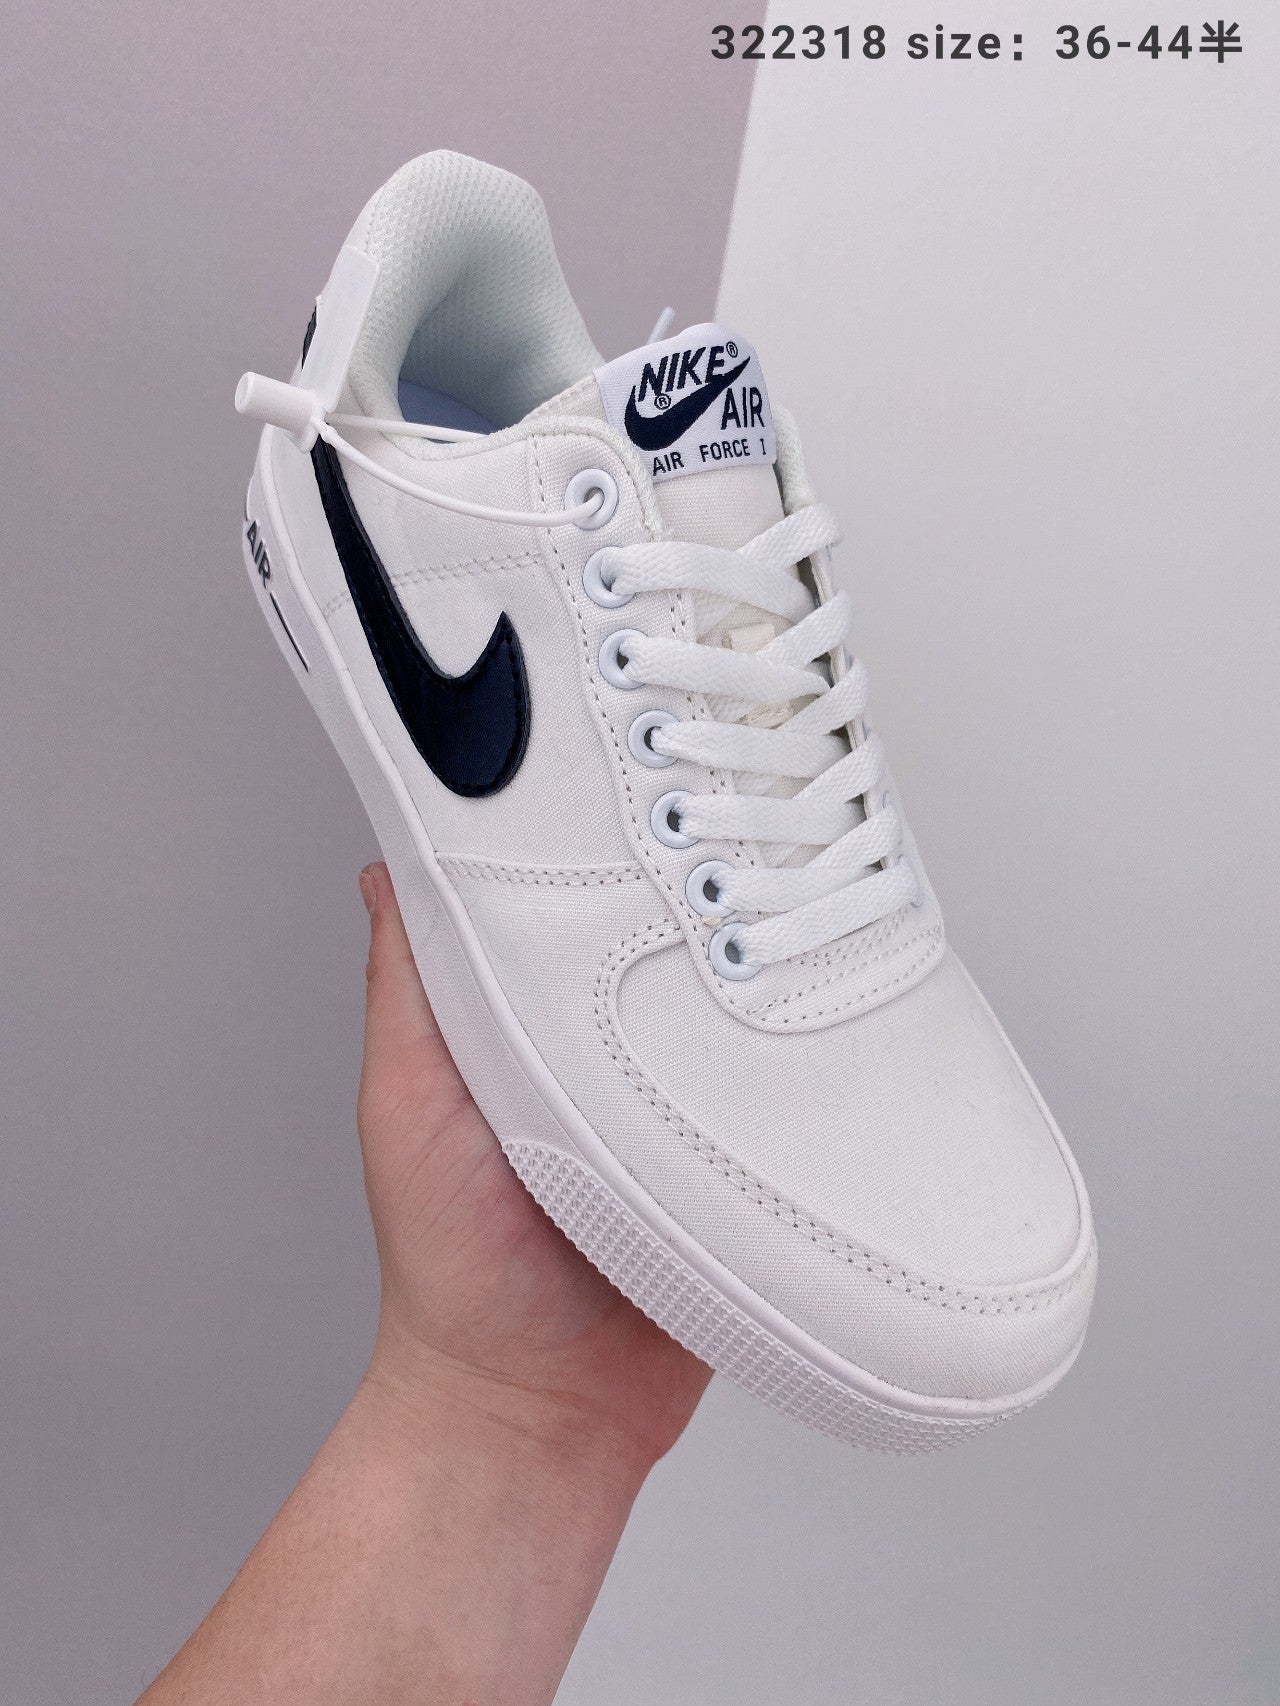 Air Force 1 Ac 630 75927 Shoes